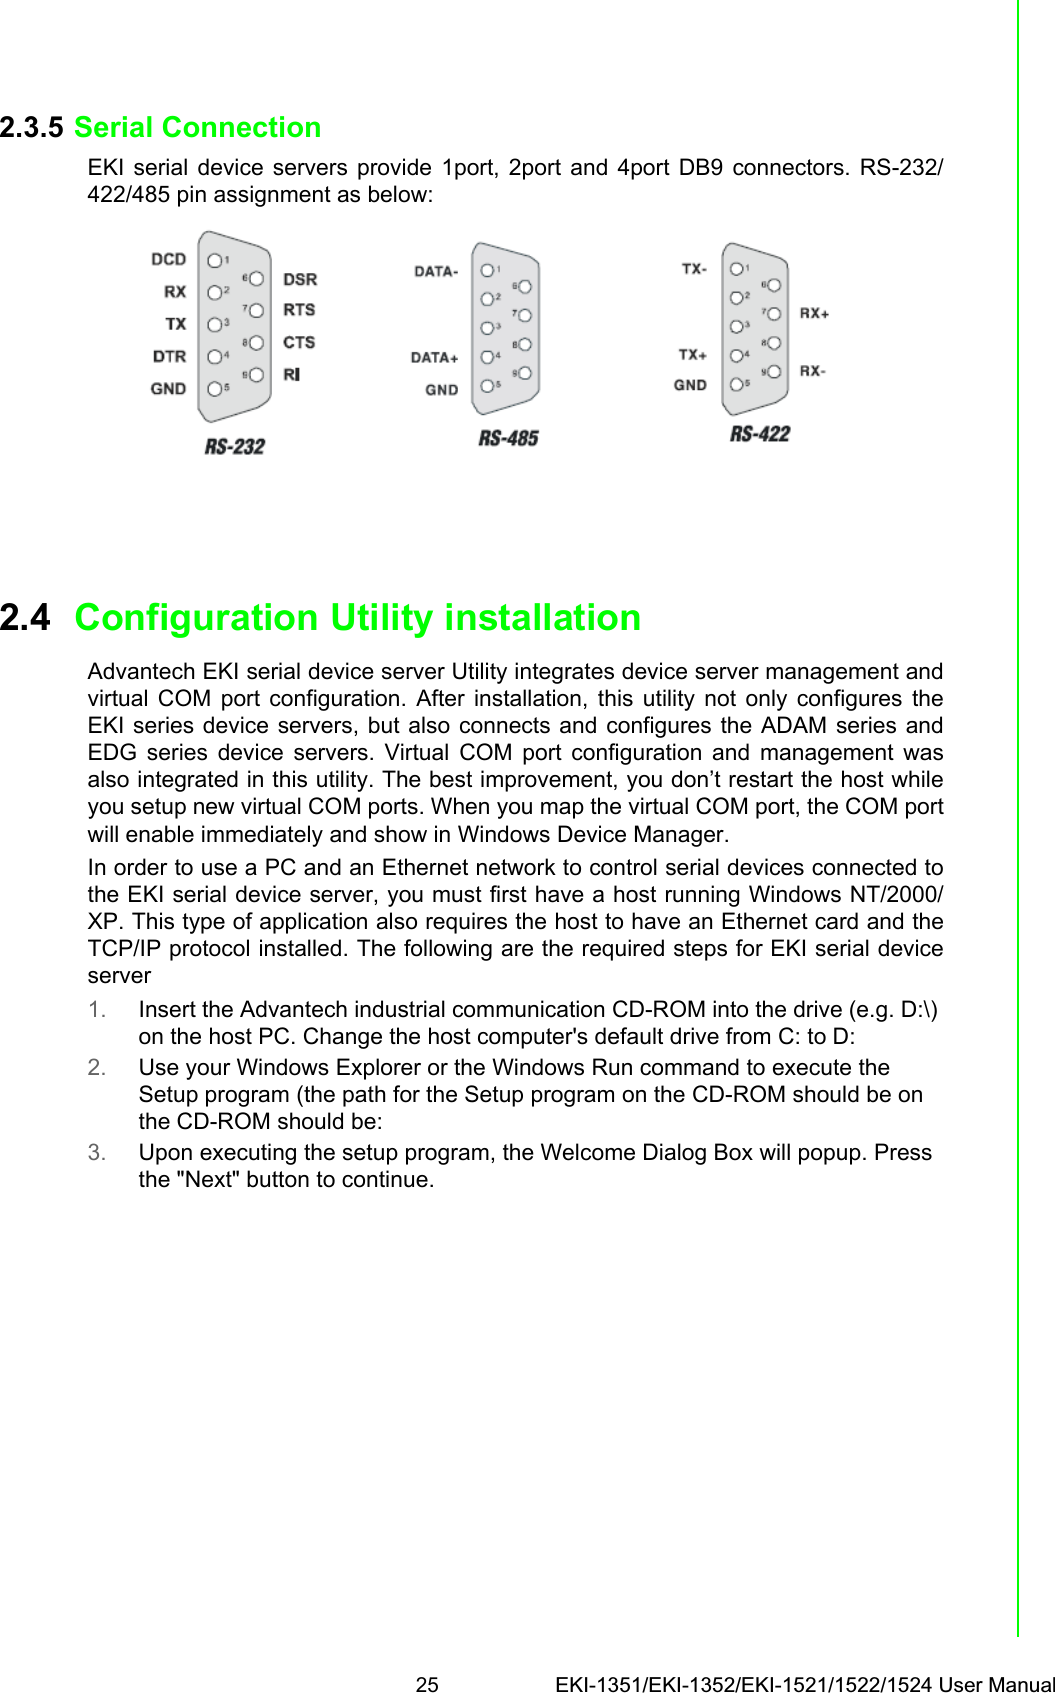 25 EKI-1351/EKI-1352/EKI-1521/1522/1524 User ManualChapter 2 Getting Started2.3.5 Serial ConnectionEKI serial device servers provide 1port, 2port and 4port DB9 connectors. RS-232/422/485 pin assignment as below:2.4 Configuration Utility installationAdvantech EKI serial device server Utility integrates device server management andvirtual COM port configuration. After installation, this utility not only configures theEKI series device servers, but also connects and configures the ADAM series andEDG series device servers. Virtual COM port configuration and management wasalso integrated in this utility. The best improvement, you don’t restart the host whileyou setup new virtual COM ports. When you map the virtual COM port, the COM portwill enable immediately and show in Windows Device Manager.In order to use a PC and an Ethernet network to control serial devices connected tothe EKI serial device server, you must first have a host running Windows NT/2000/XP. This type of application also requires the host to have an Ethernet card and theTCP/IP protocol installed. The following are the required steps for EKI serial deviceserver1. Insert the Advantech industrial communication CD-ROM into the drive (e.g. D:\) on the host PC. Change the host computer&apos;s default drive from C: to D:2. Use your Windows Explorer or the Windows Run command to execute the Setup program (the path for the Setup program on the CD-ROM should be on the CD-ROM should be:3. Upon executing the setup program, the Welcome Dialog Box will popup. Press the &quot;Next&quot; button to continue.